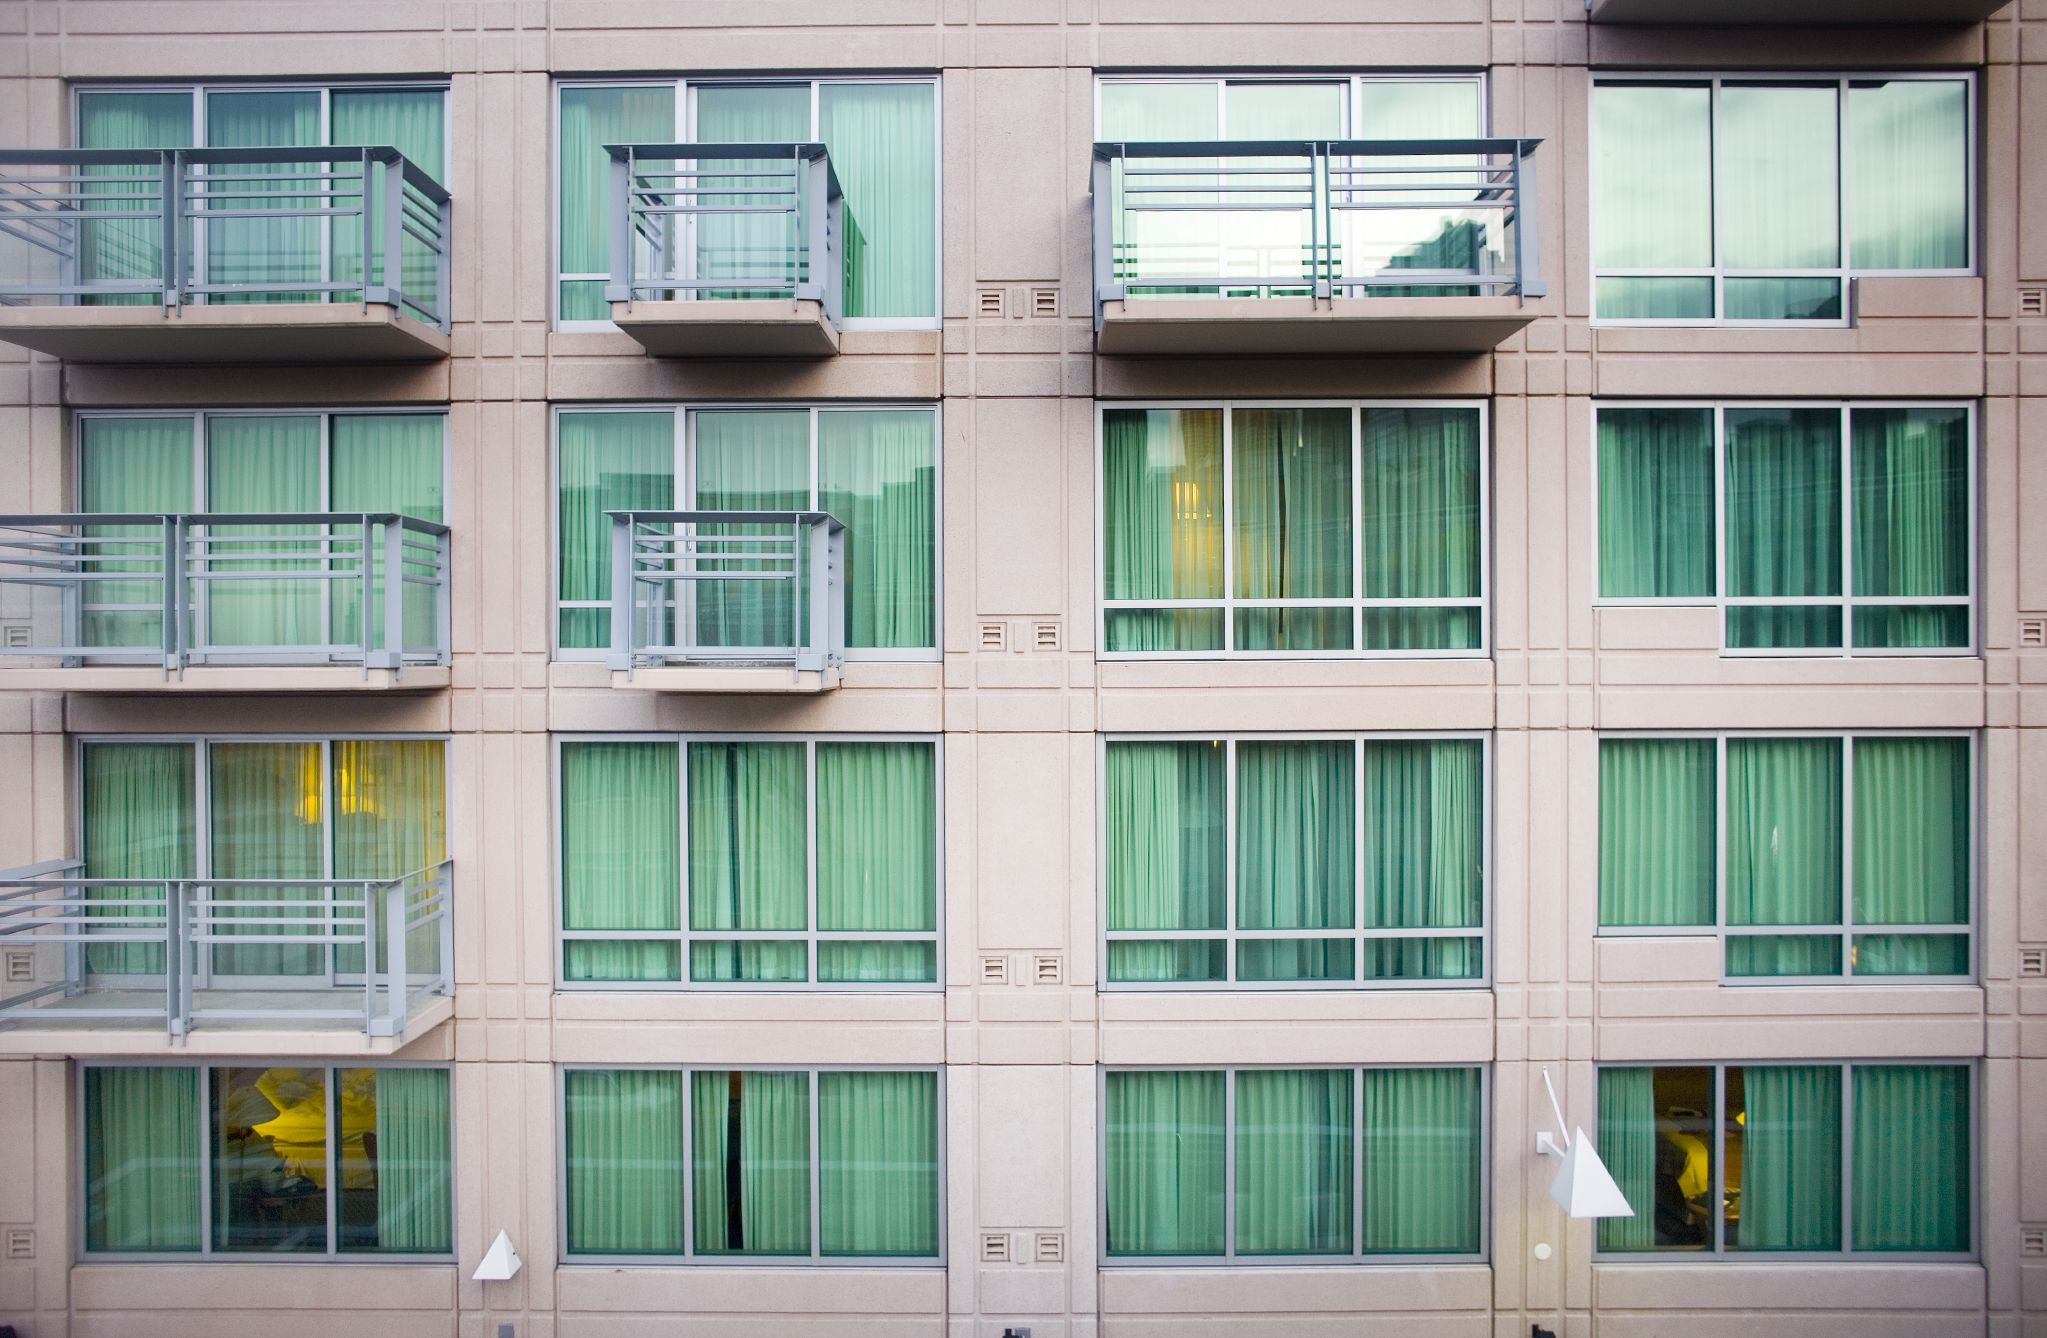 Three rows of floor to ceiling windows on the outside of a beige building with intermittent balconies.